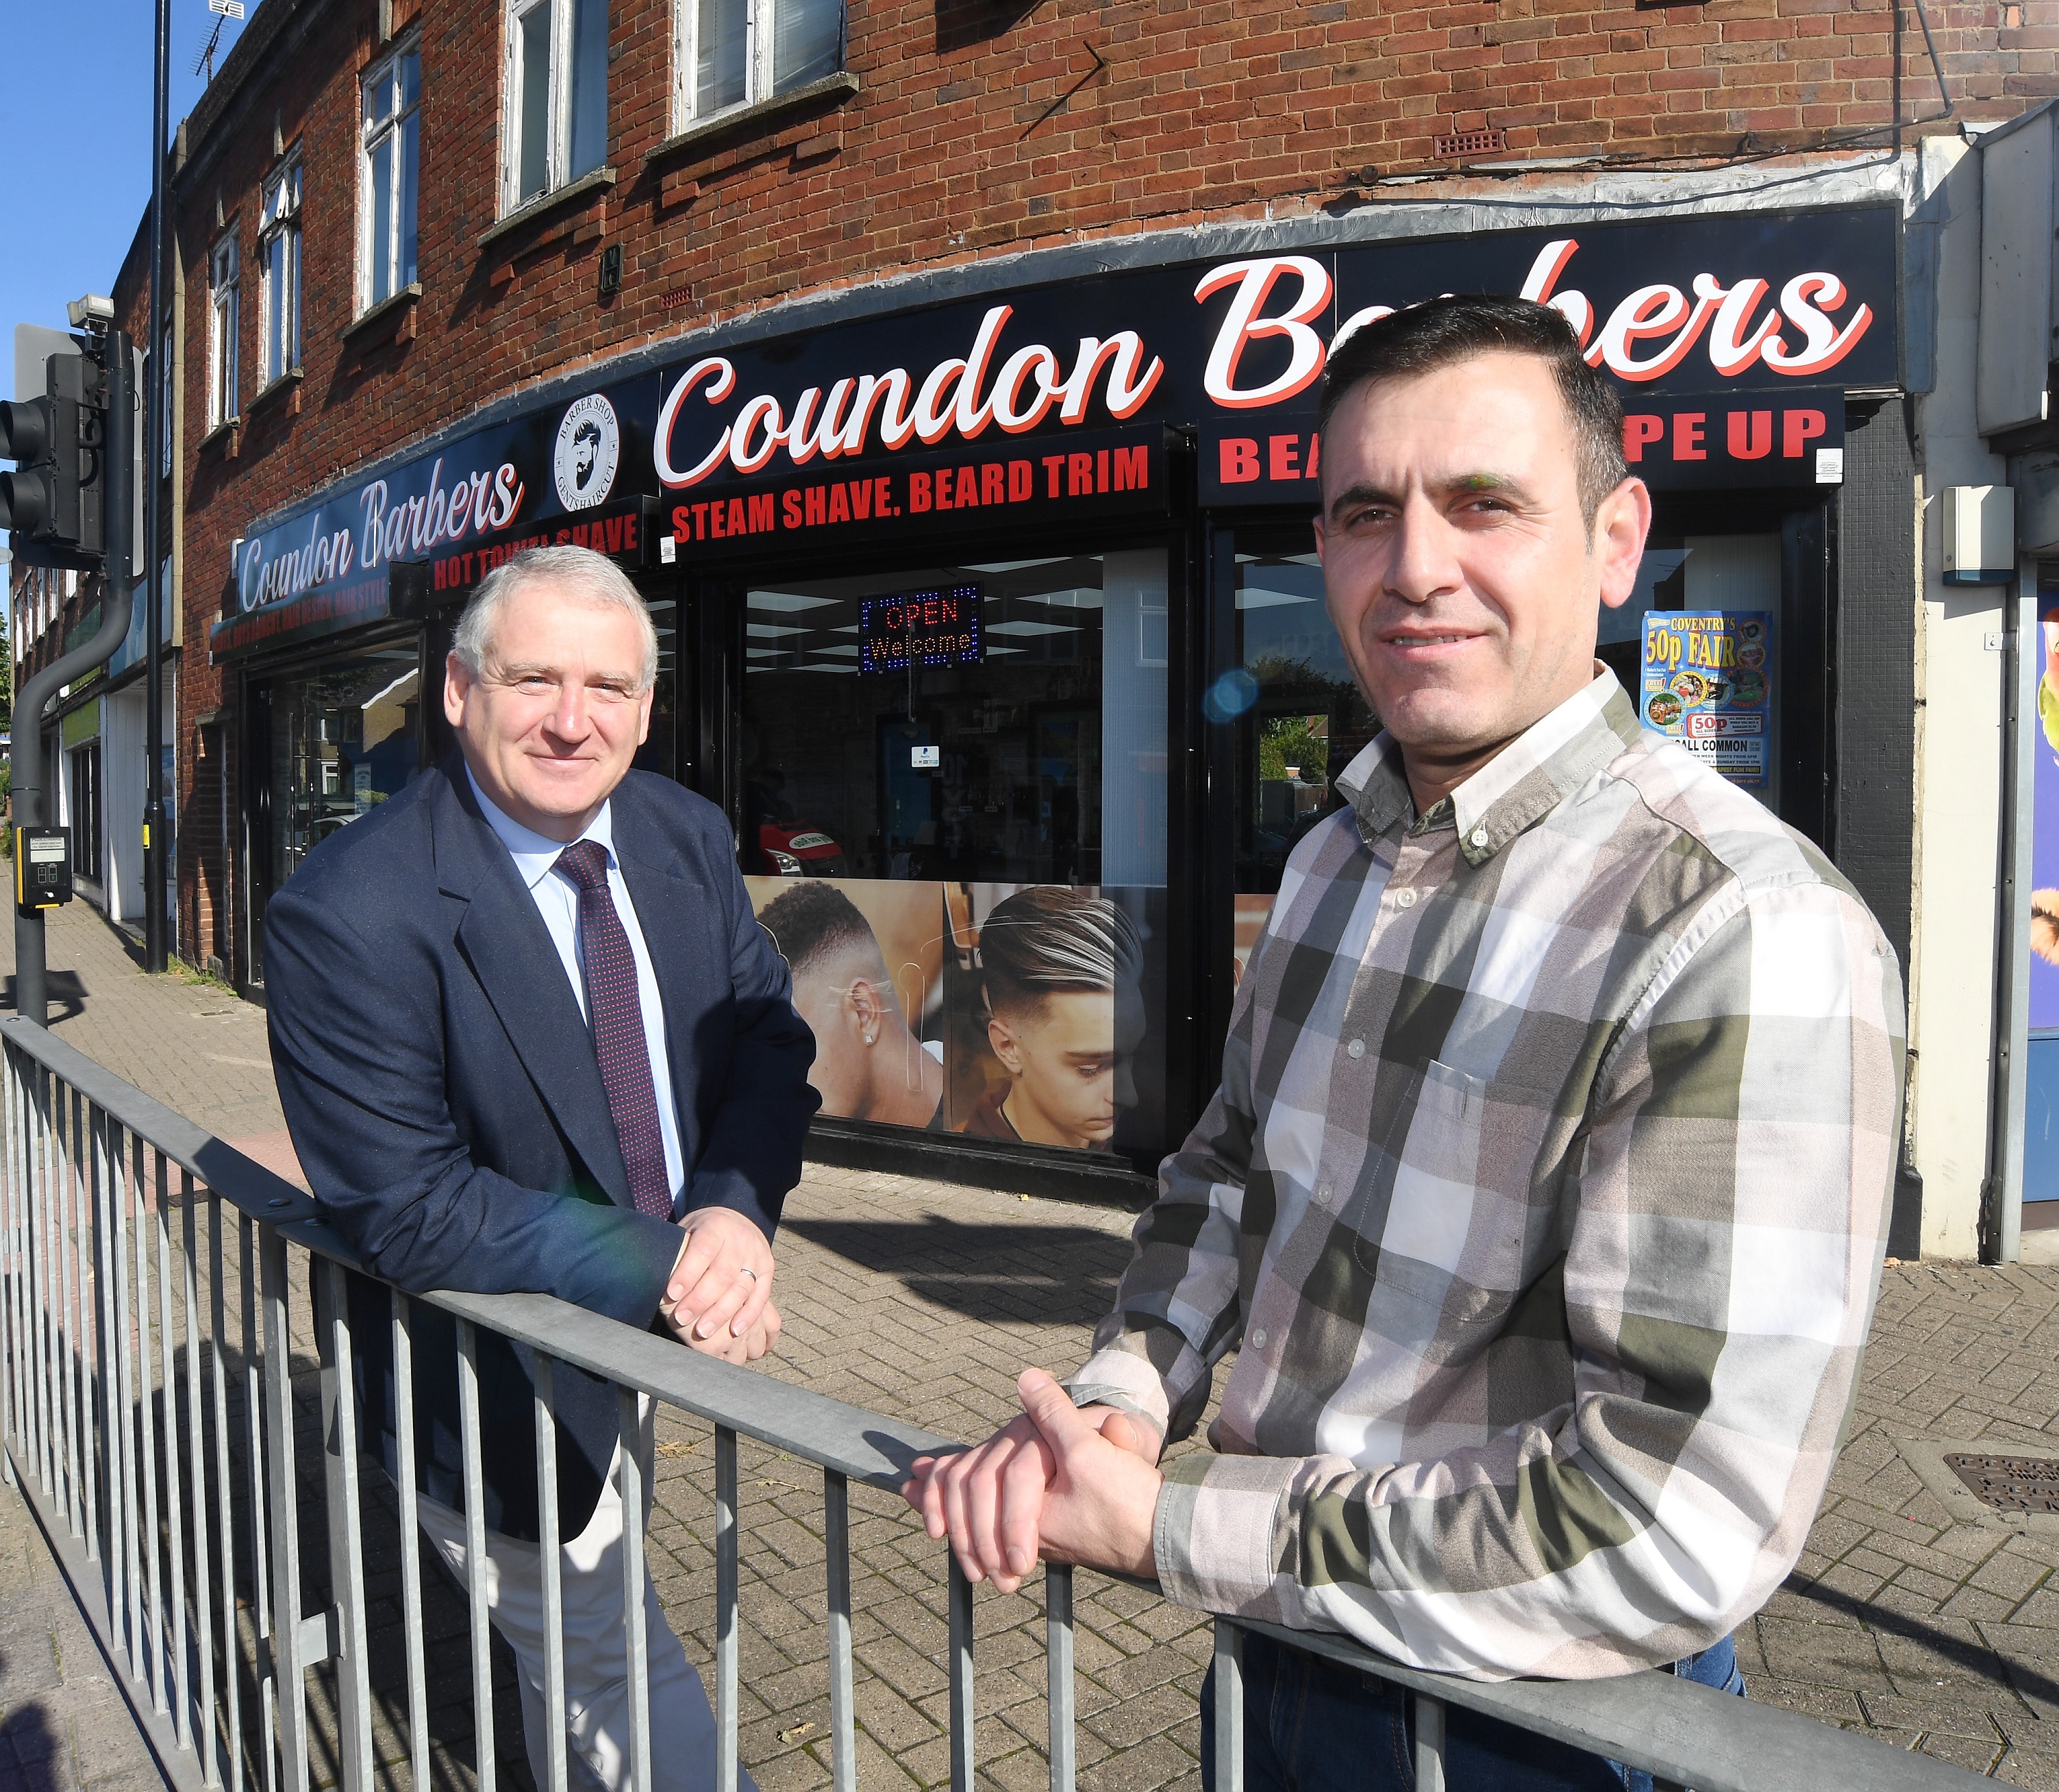 New barbers in Coventry is cutting it after opening new store